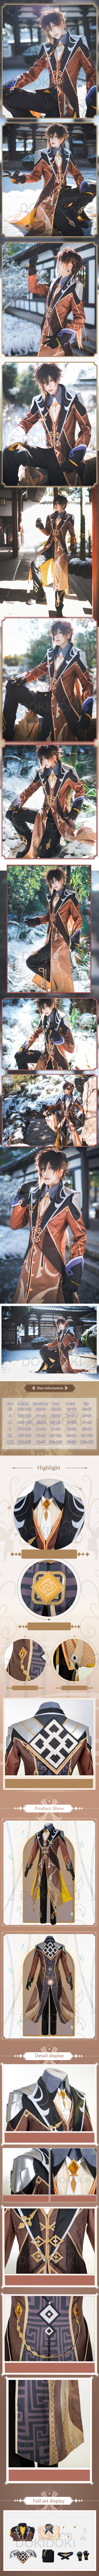 This amazing #zhongli cosplay by Coser流沐